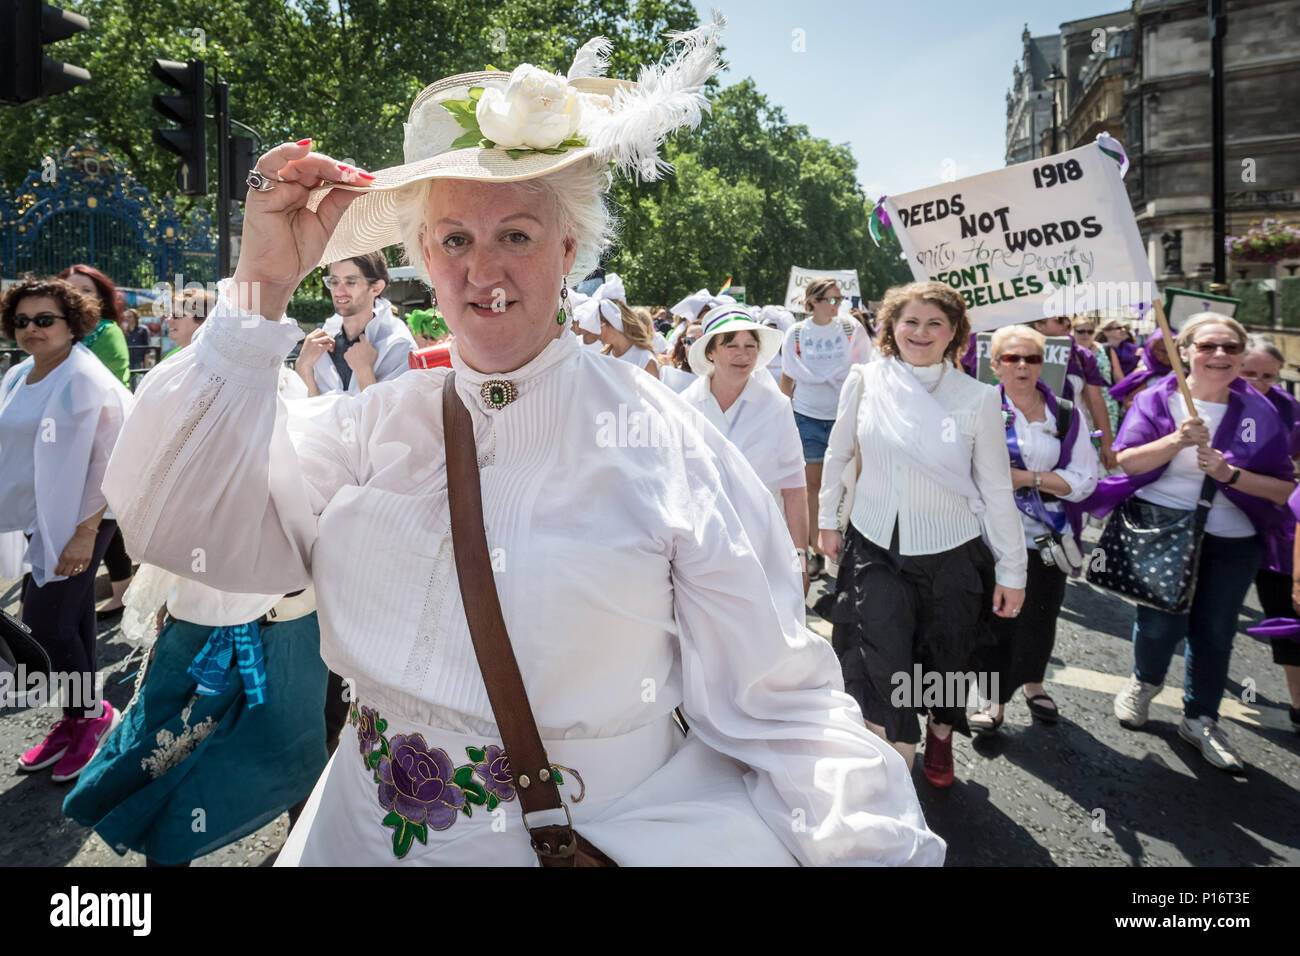 London, UK. 10th June 2018. Thousands of women join Processions 2018. Dressing in the green, white and purple tri-colour scheme of the Suffragette’s Women's Social and Political Union, they marched from Hyde Park to Parliament Square to mark 100 years since the Representation of the People Act, which gave British women the right to vote and stand for public office in the UK. Credit: Guy Corbishley/Alamy Live News Stock Photo